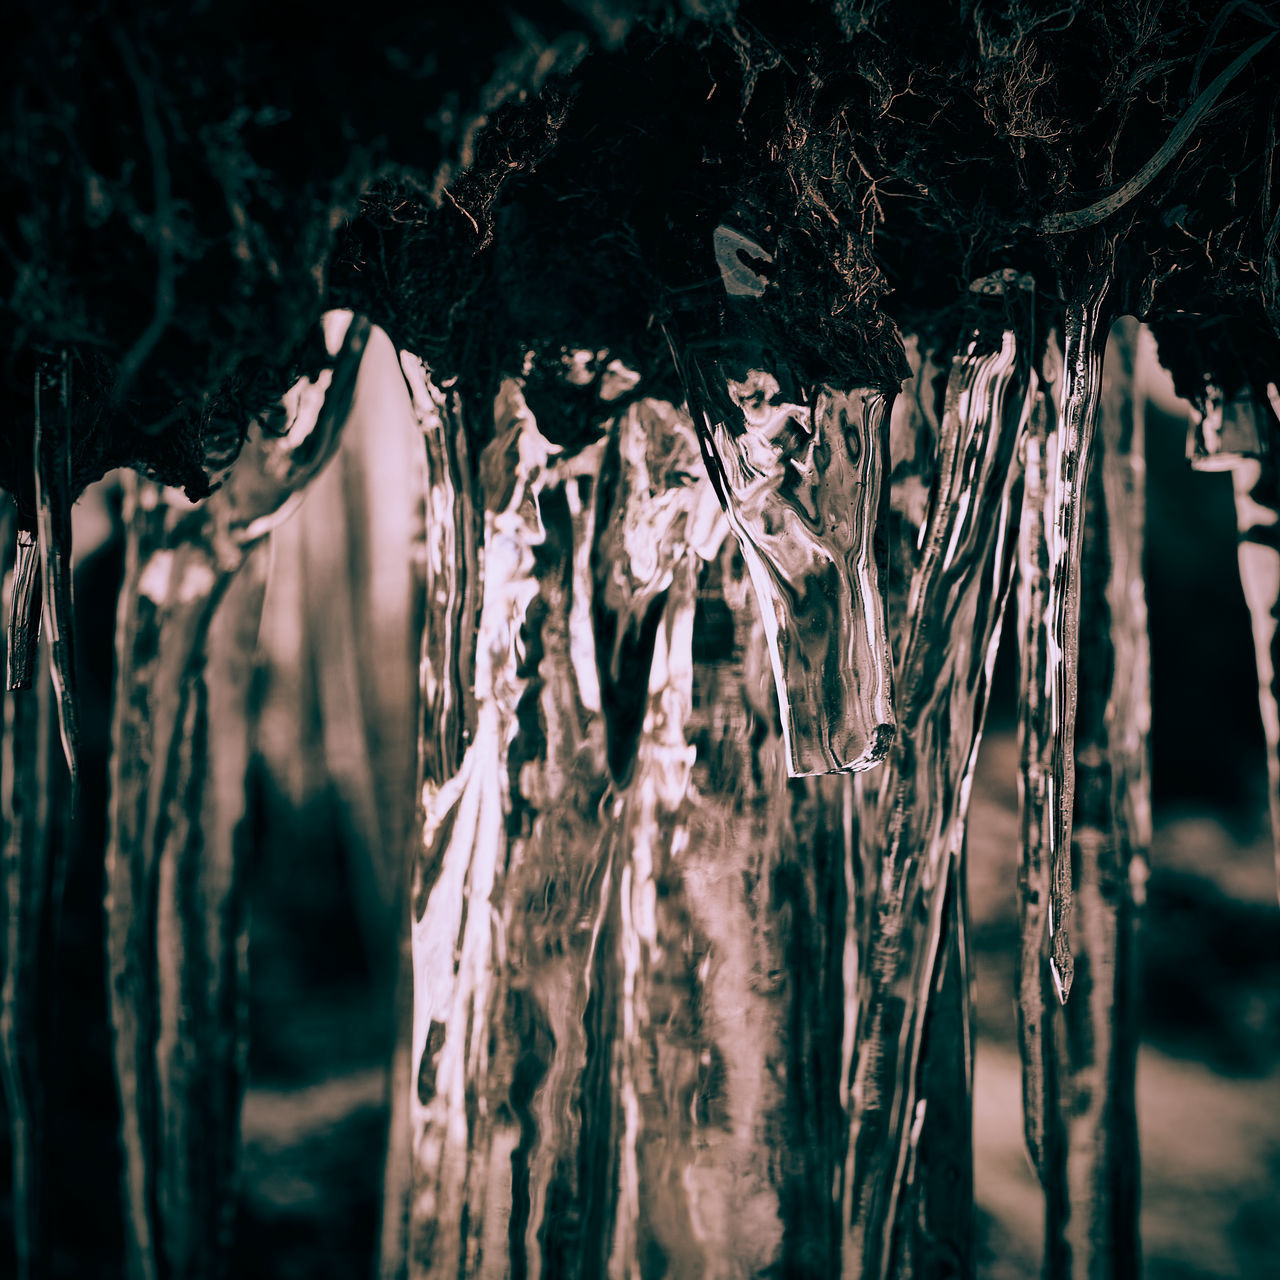 CLOSE-UP OF FROZEN PLANTS AGAINST TREES